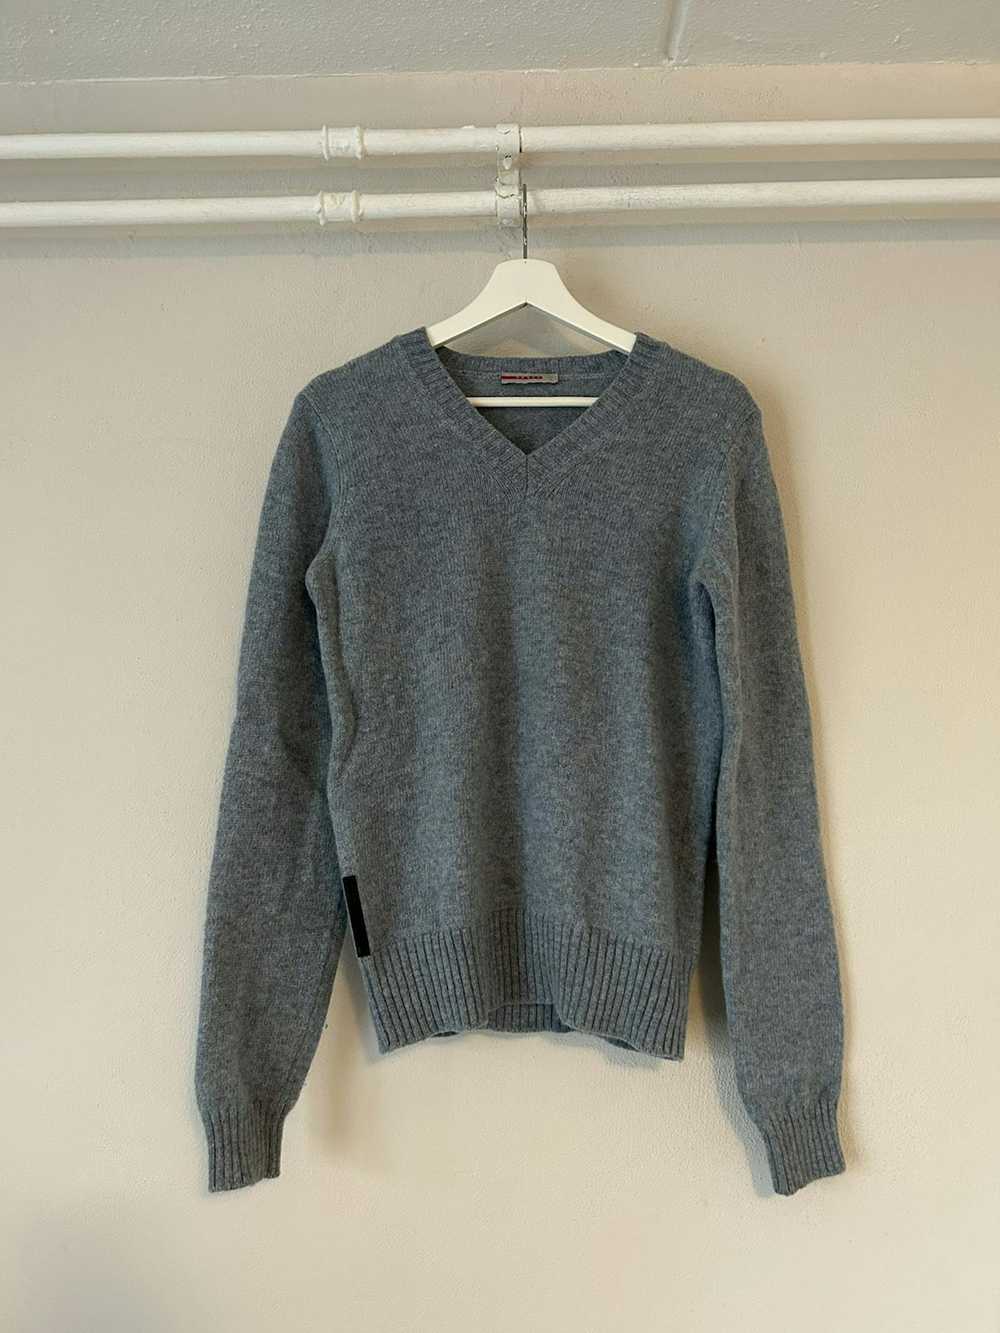 Prada Wool V-Neck Pullover with Leather Elbow Pads - image 1